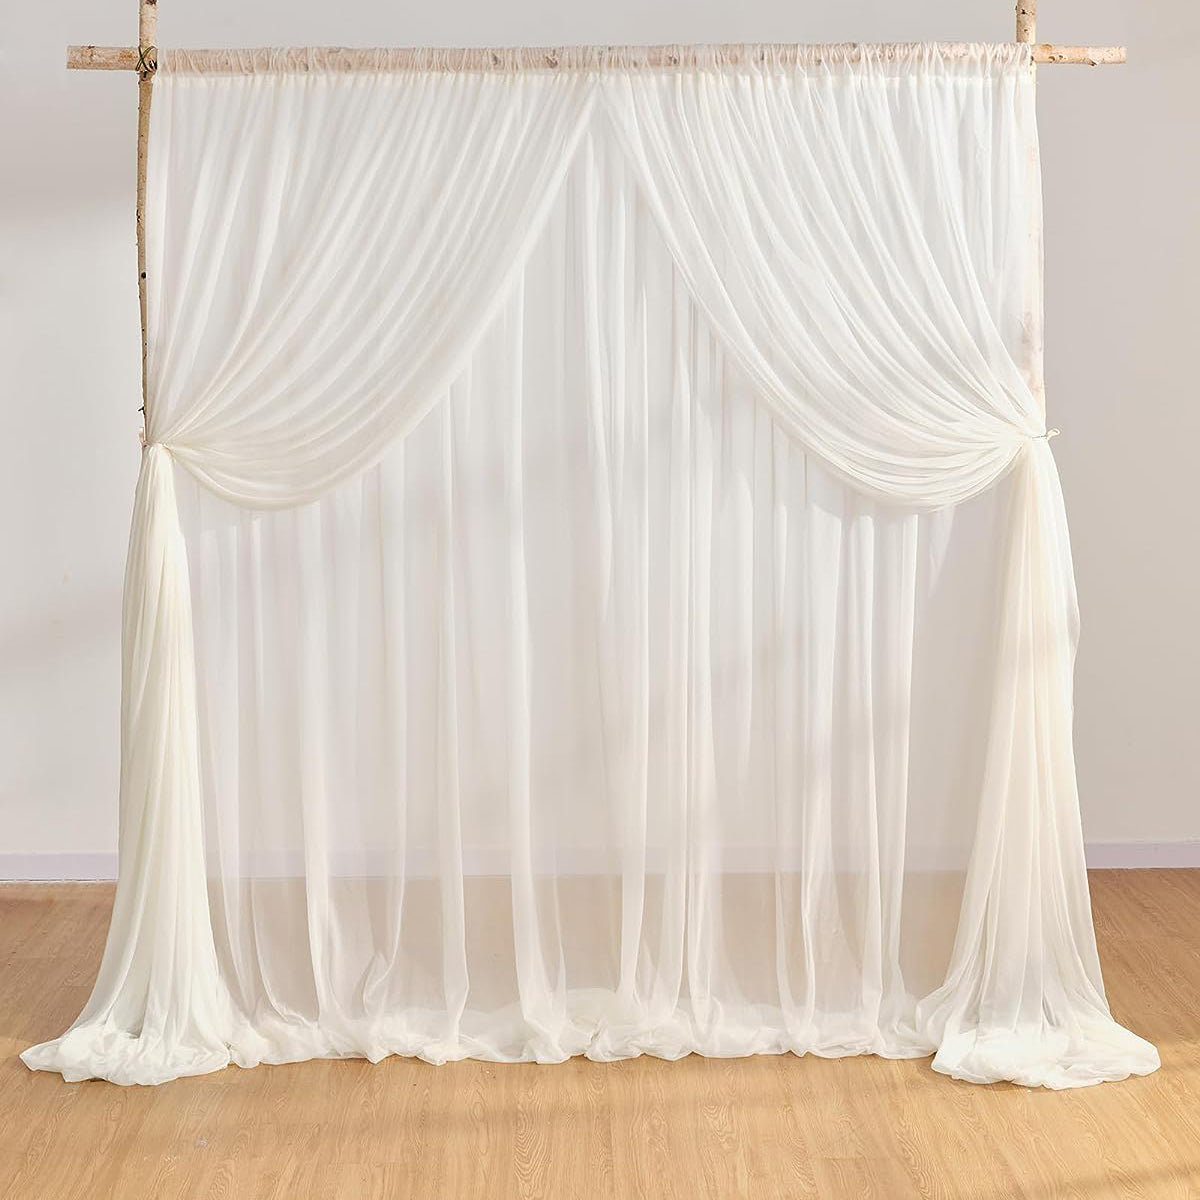 Double Layered Wedding Backdrop Curtains 10Ft, Wrinkle-Free Wedding Arch Sheer Draping Fabric Rose Morning